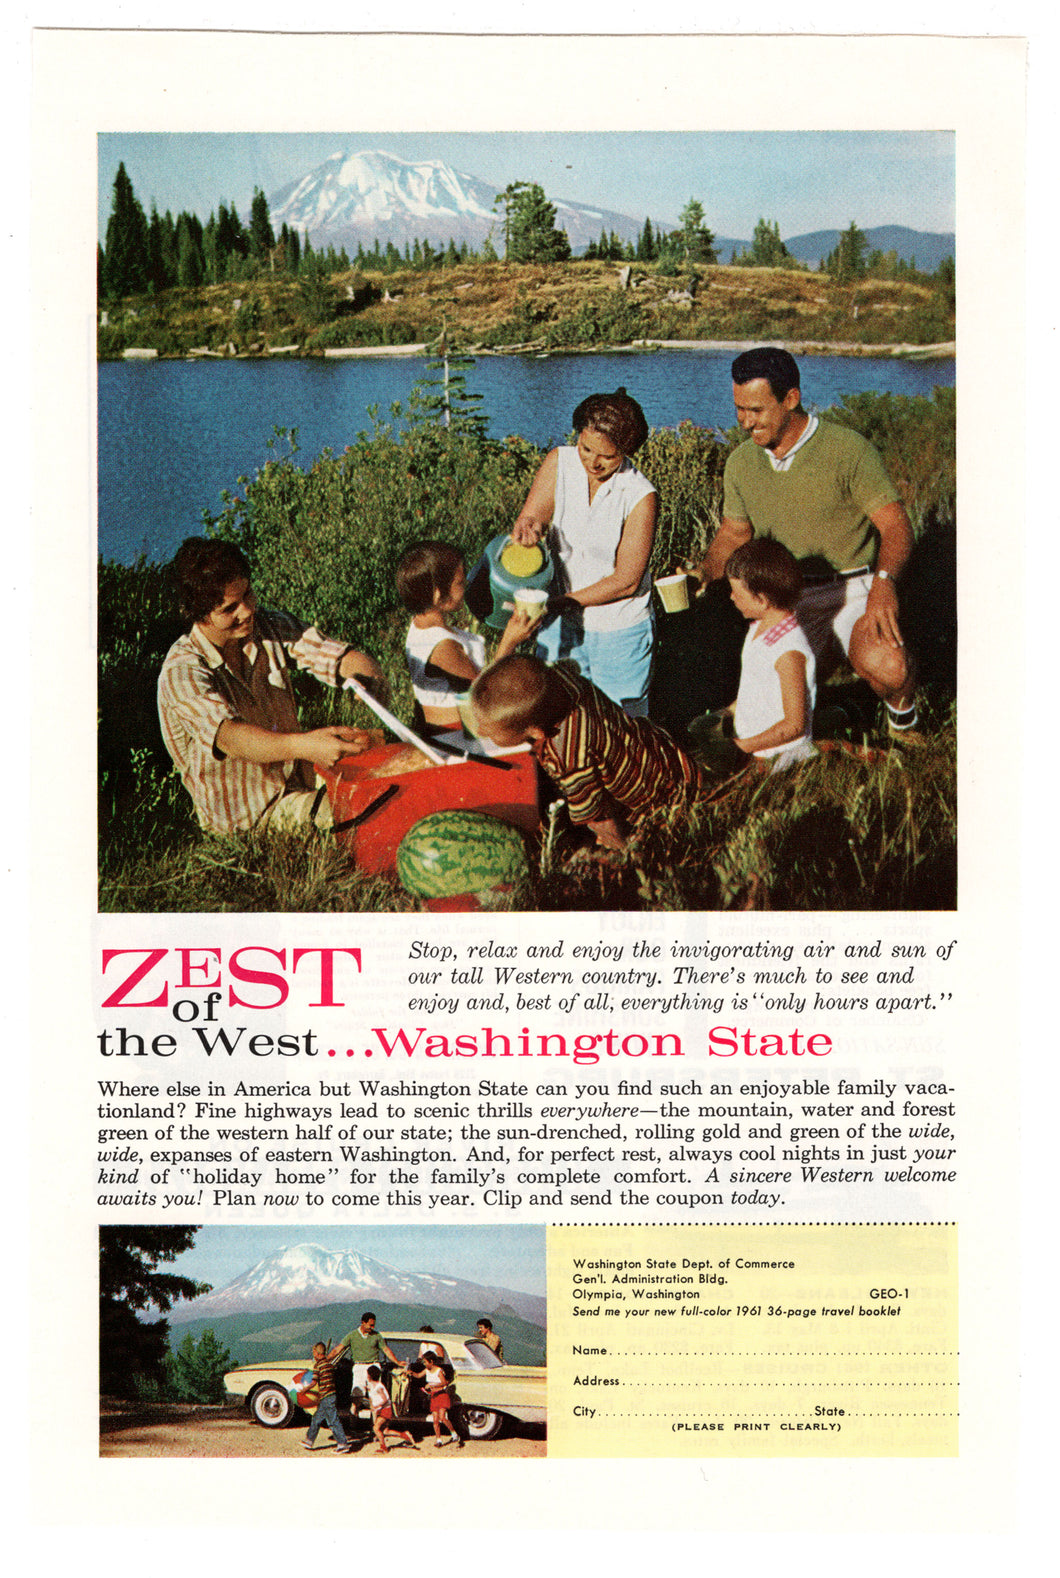 Washington State Vacation, USA Vintage Ad - (Zest of the West) # 536 - 1960's